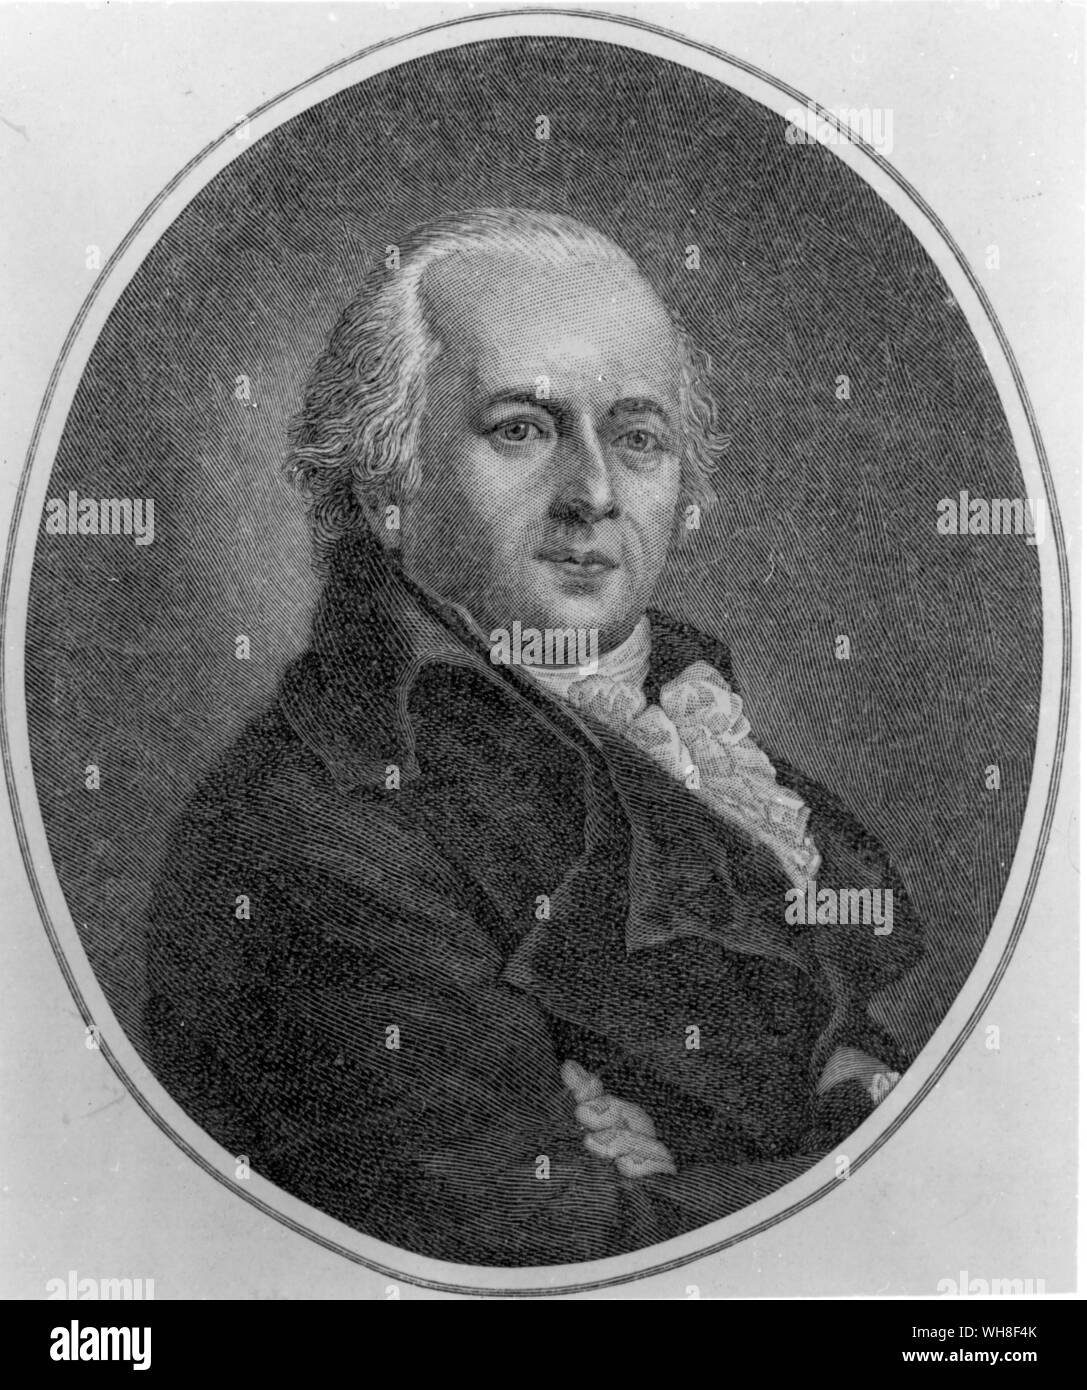 Johann Friedrich Reichardt (1752-1814) was a German composer, conductor and writer about music. In 1776 he became Kapellmeister in Berlin at the court of Frederick the Great, a post he held until 1794.. . Stock Photo